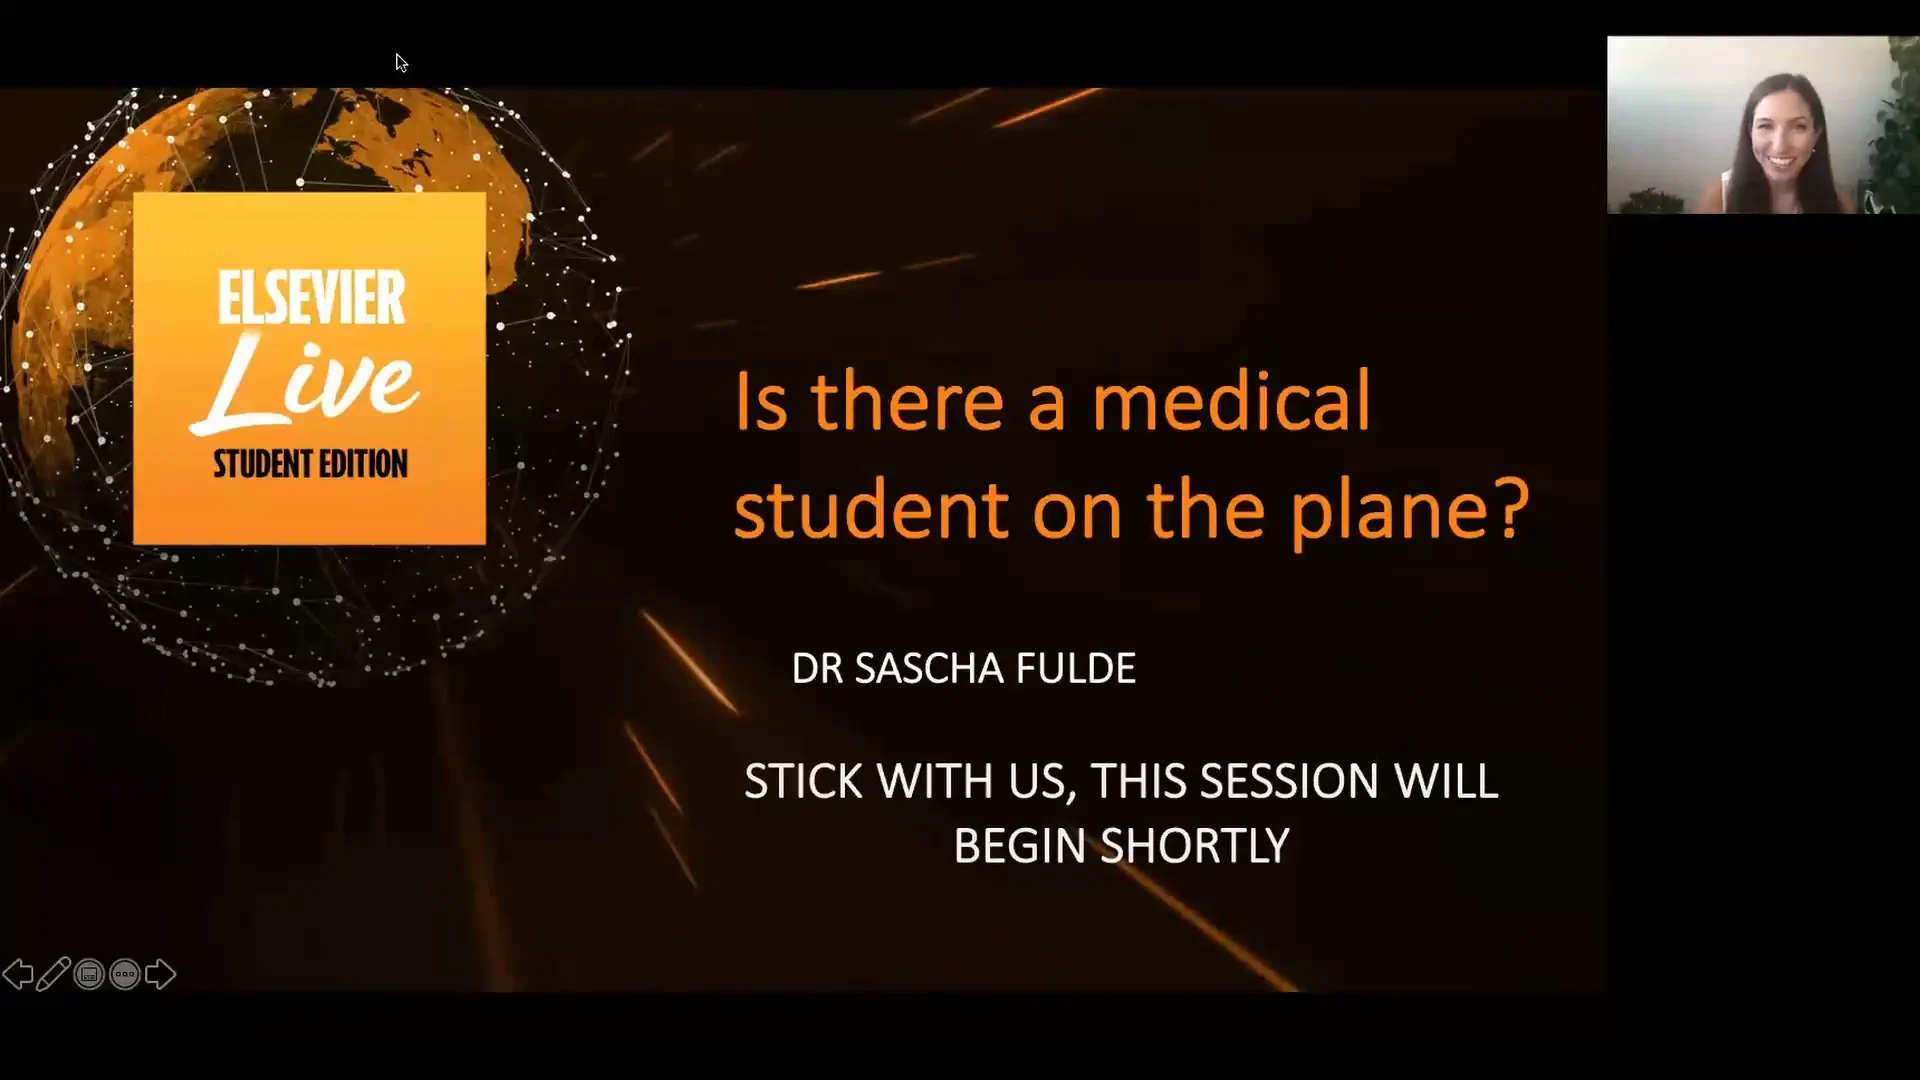 Is there a medical student on the plane?